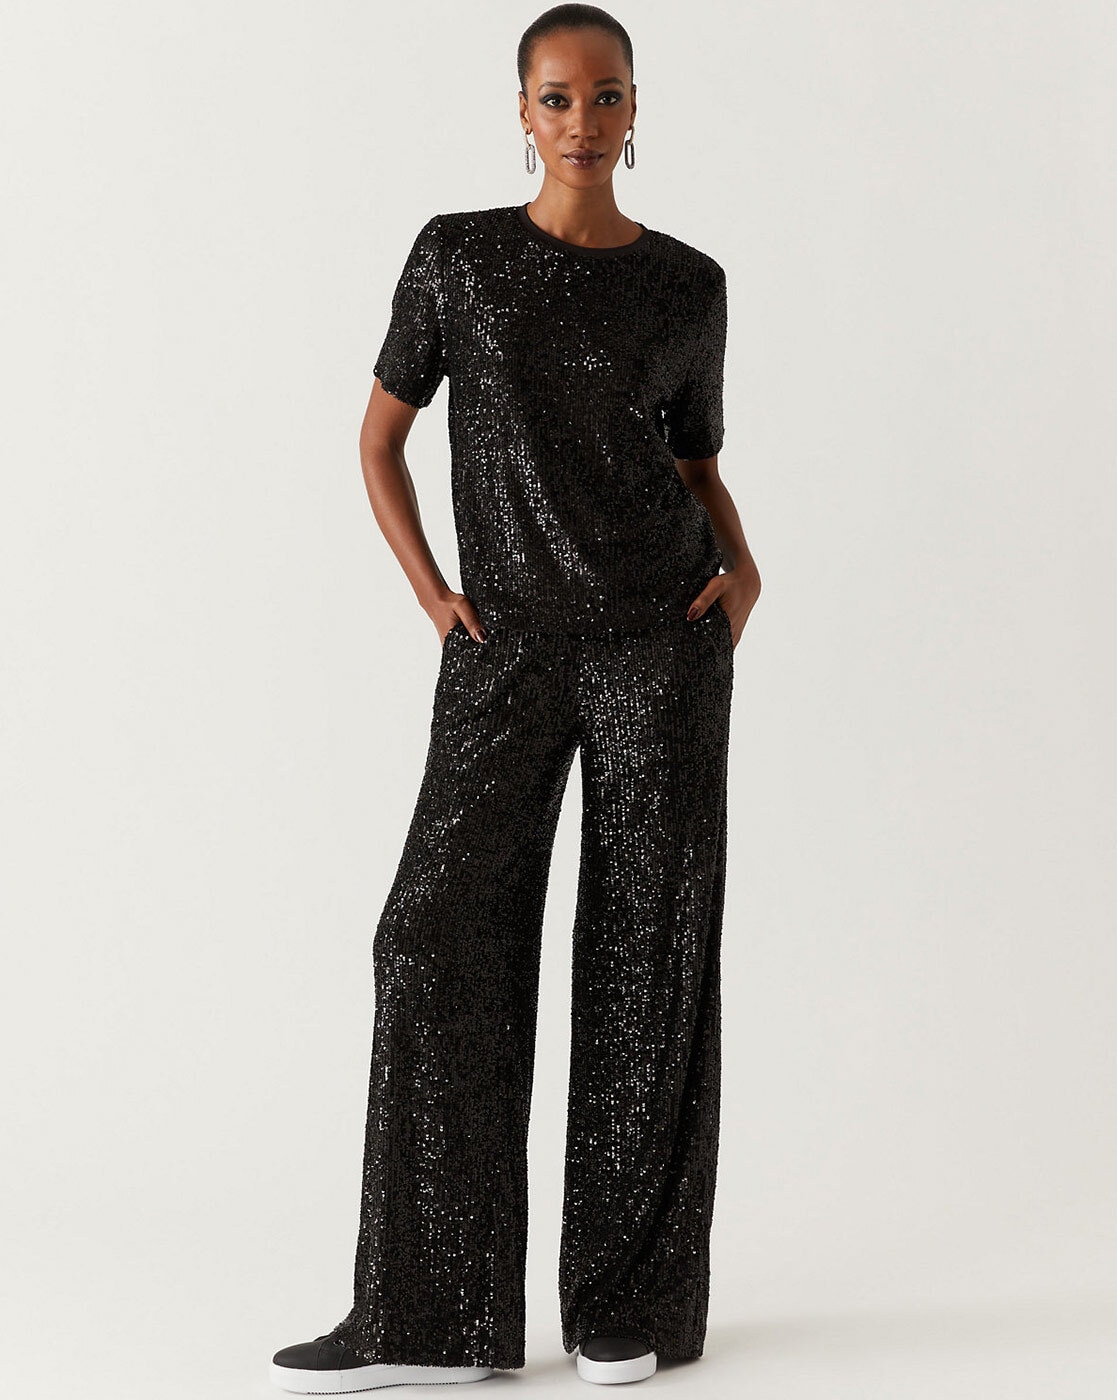 Buy BLENCOT Bell Bottoms for Women High Waisted Wide Leg Palazzo Pants  Bling Sequin Flared Trousers Black Small at Amazonin